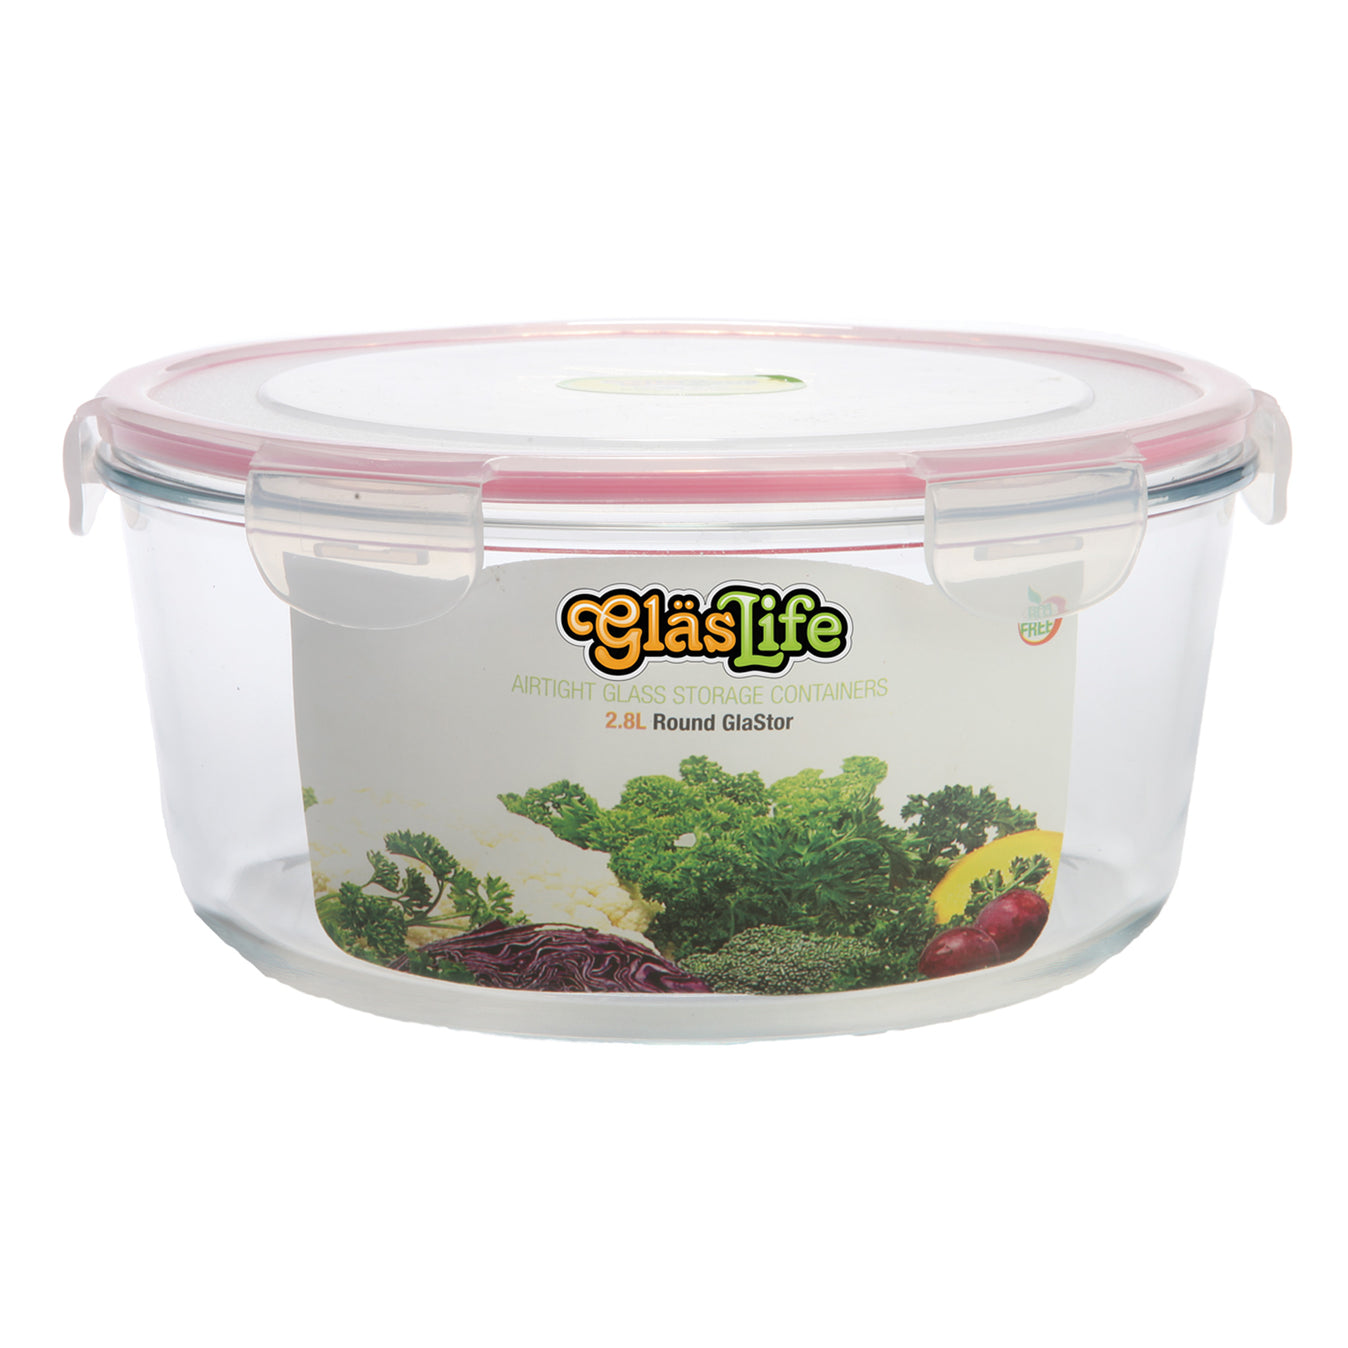 GlasLife® Air-Tight Glass Storage Container - Round